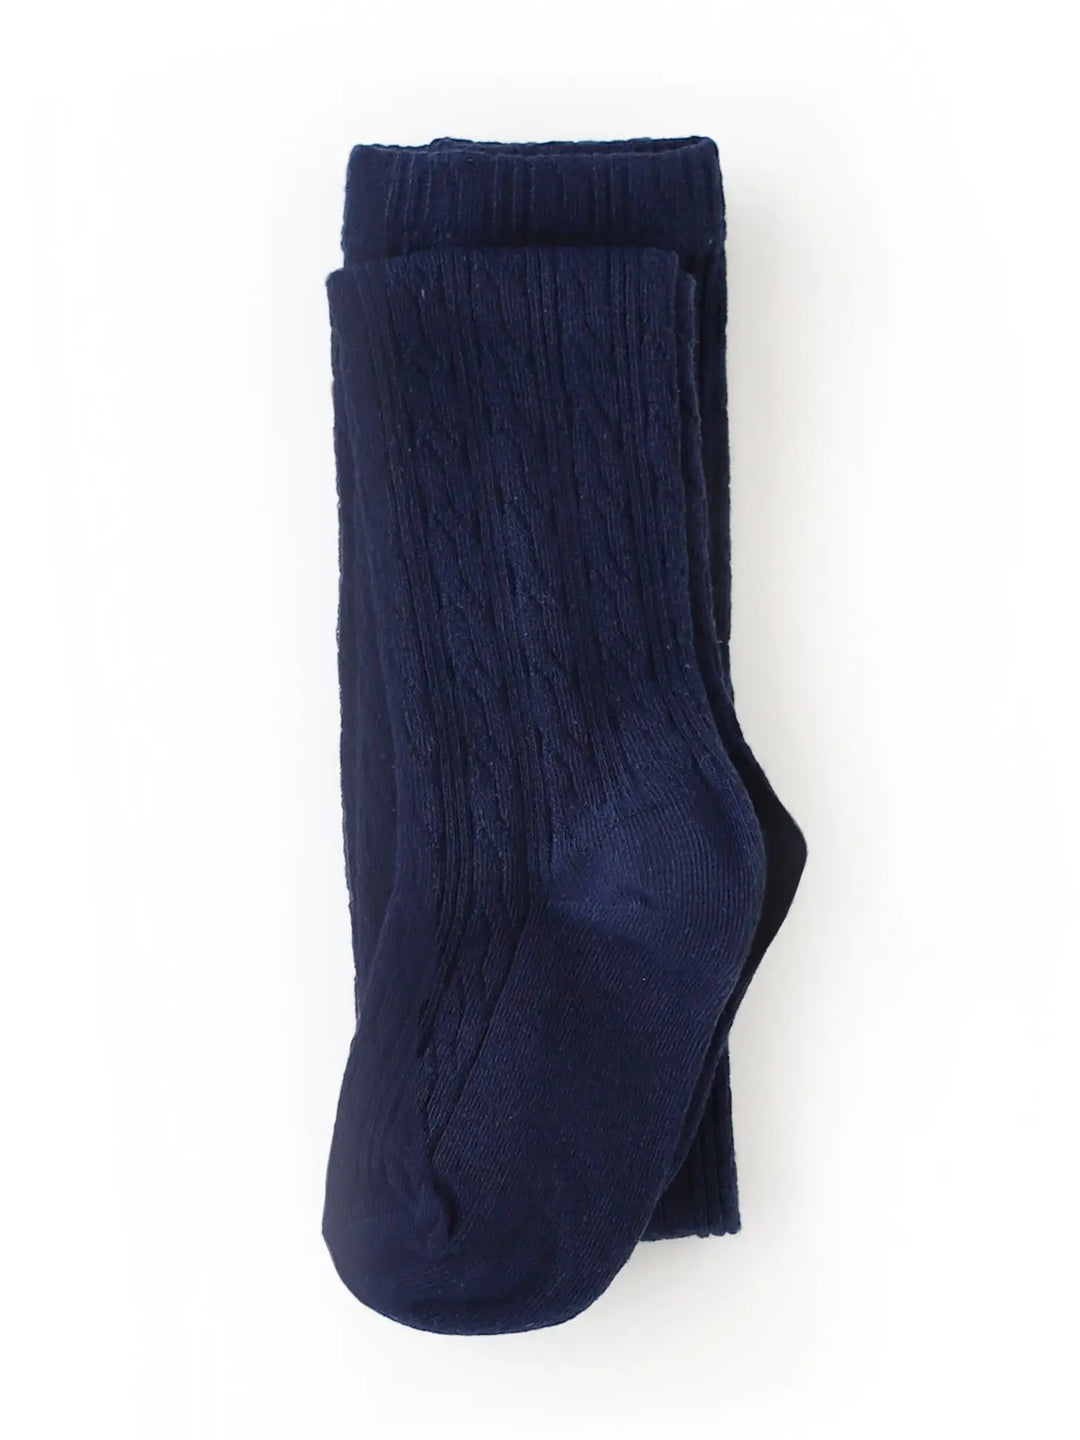 Little Stocking Company Navy Cable Knit Tights |Mockingbird Baby & Kids